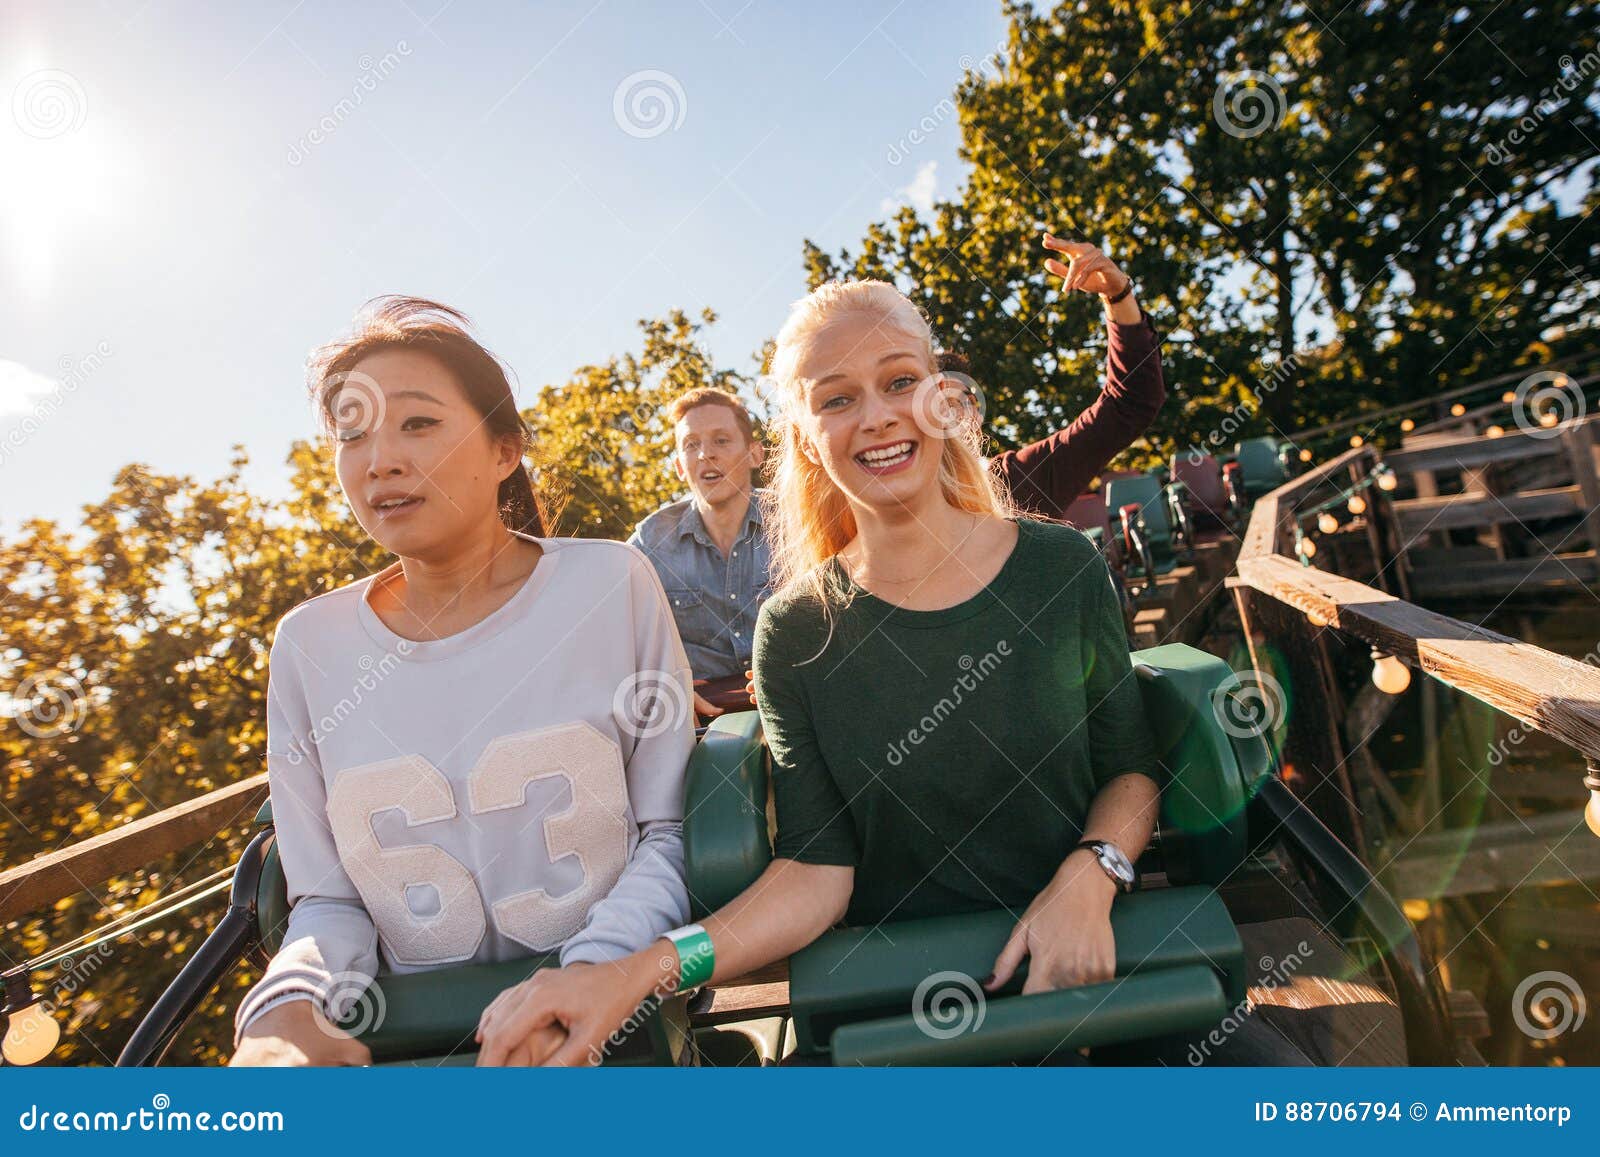 Happy Young People Riding a Roller Coaster Stock Photo - Image of ...